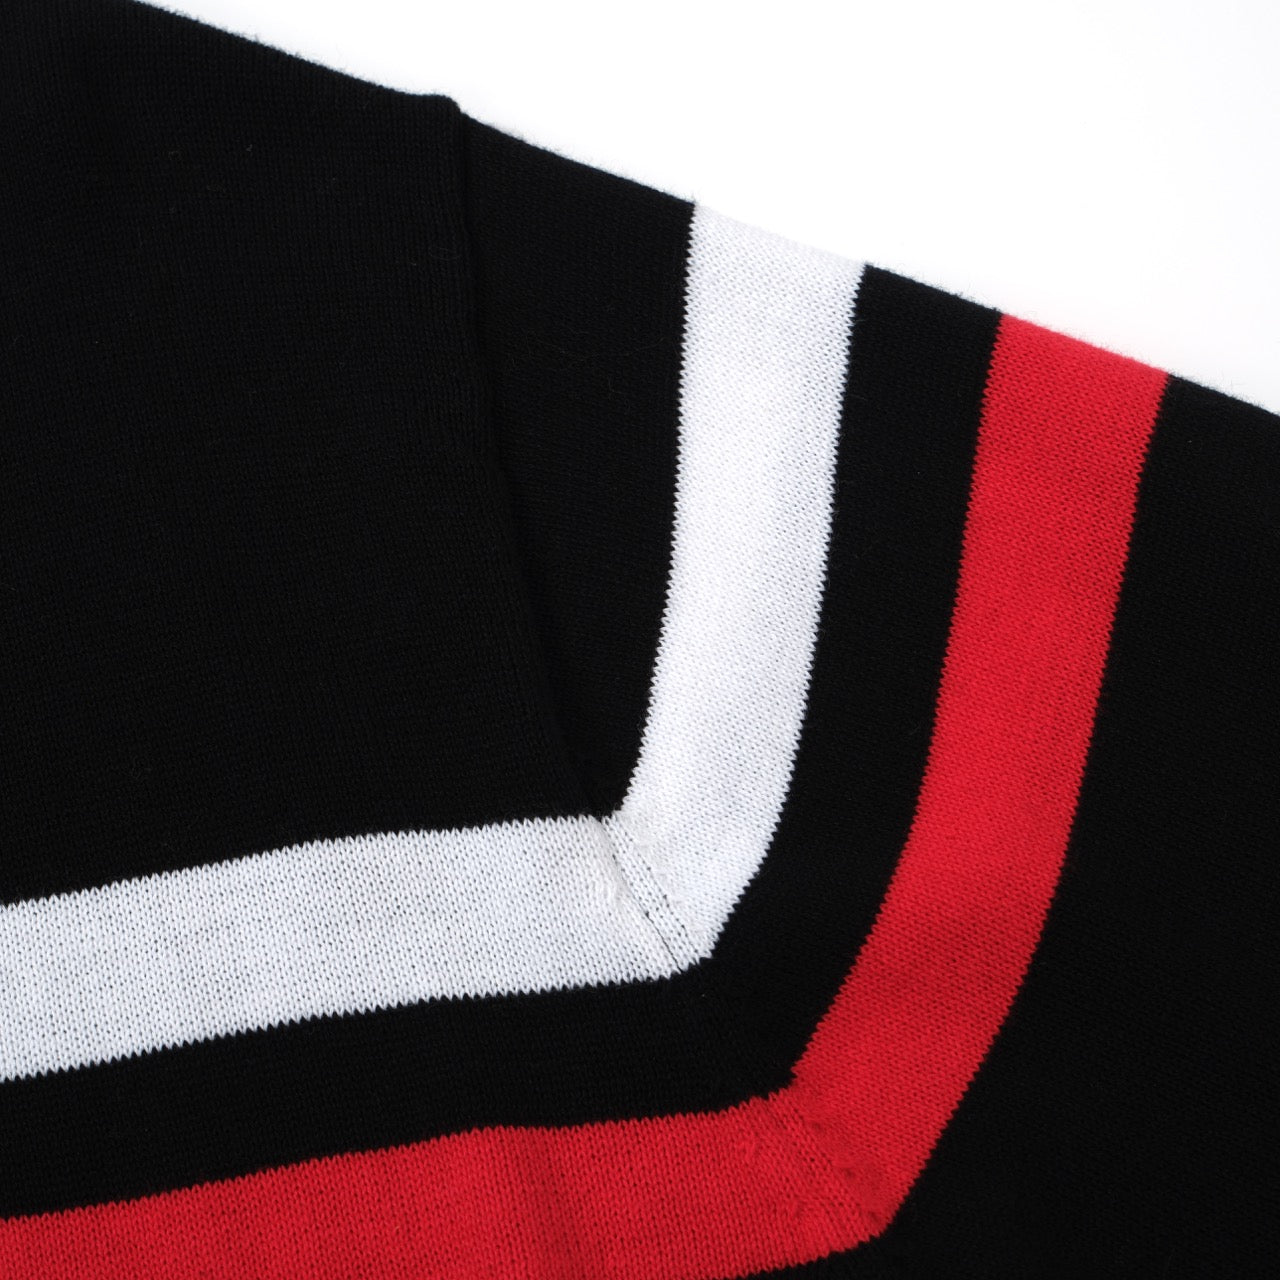 Men's Black Retro Knitted Zip Cardigan With Red & White Racing Stripes Through